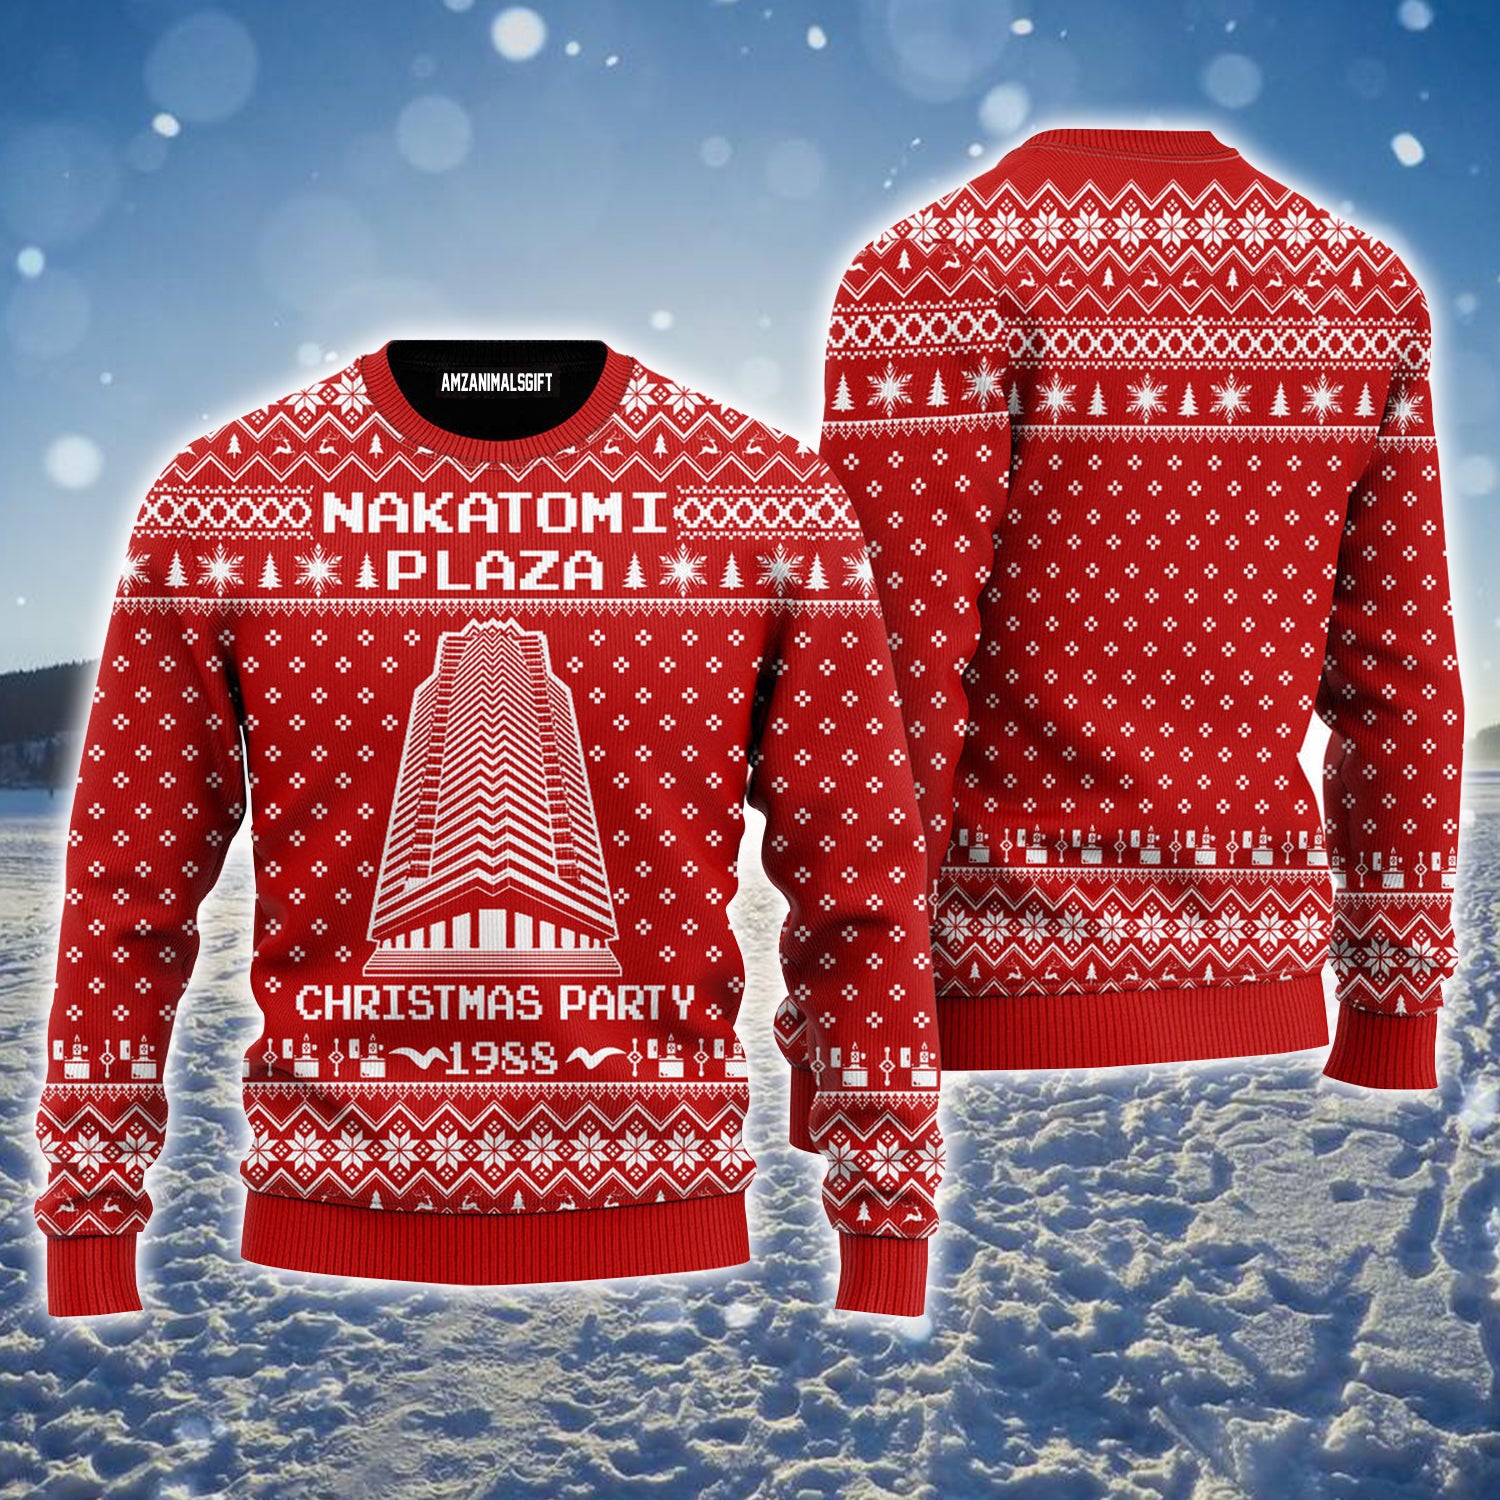 Nakatomi Plaza 1988 Ugly Christmas Sweater, Christmas Party Pattern Ugly Sweater For Men & Women - Perfect Gift For Christmas, Family, Friends